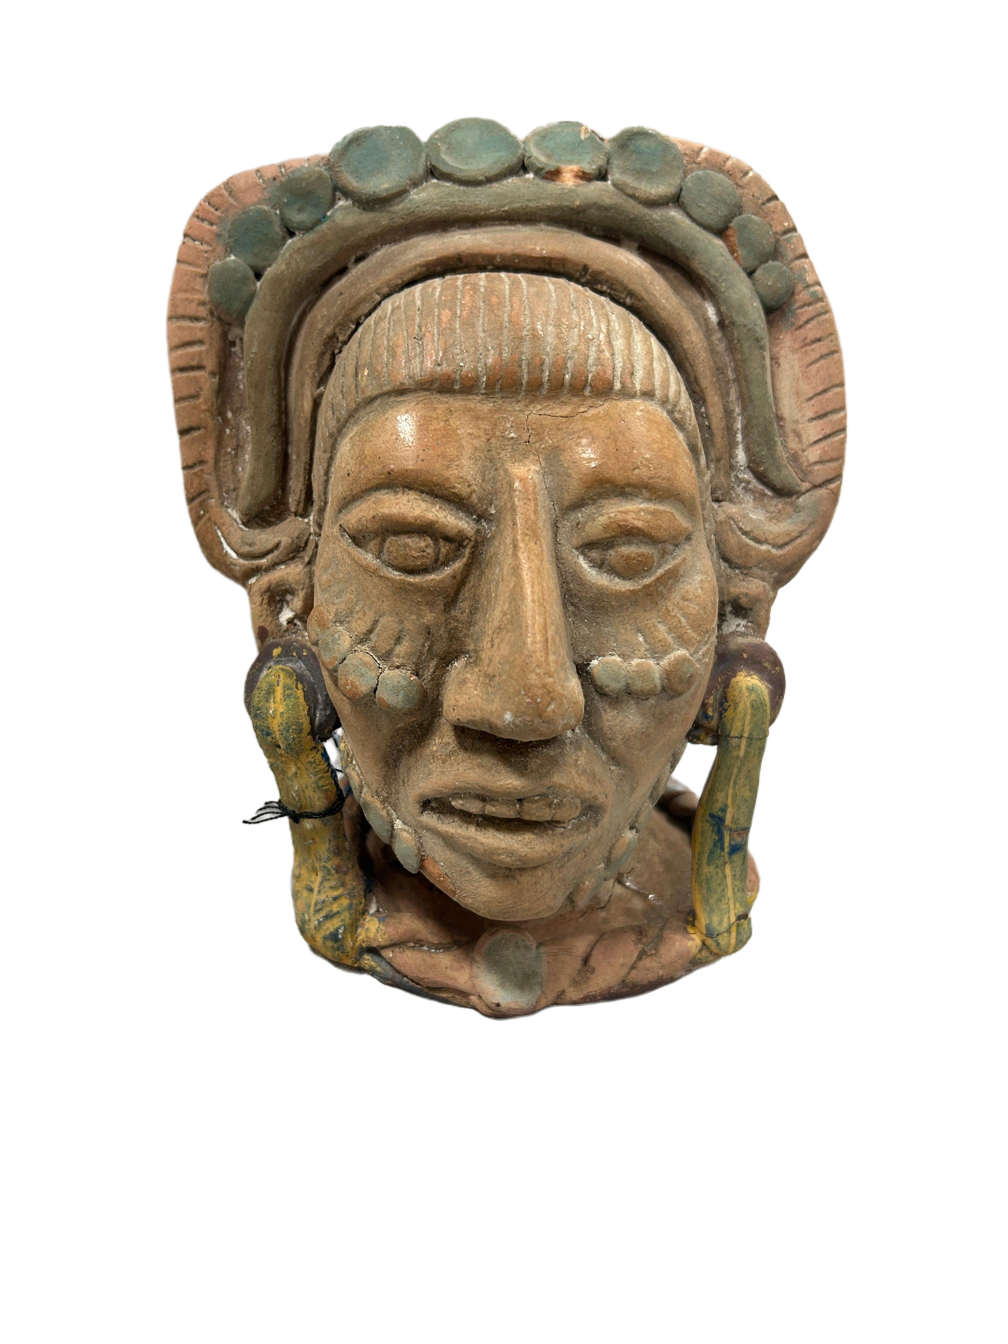 mask sculpted in the likeness of a carved, showcasing a bronze patina finish, reflecting the artist's skill in capturing human head and expression.Available at the hearing clinic at Allard Audiology.